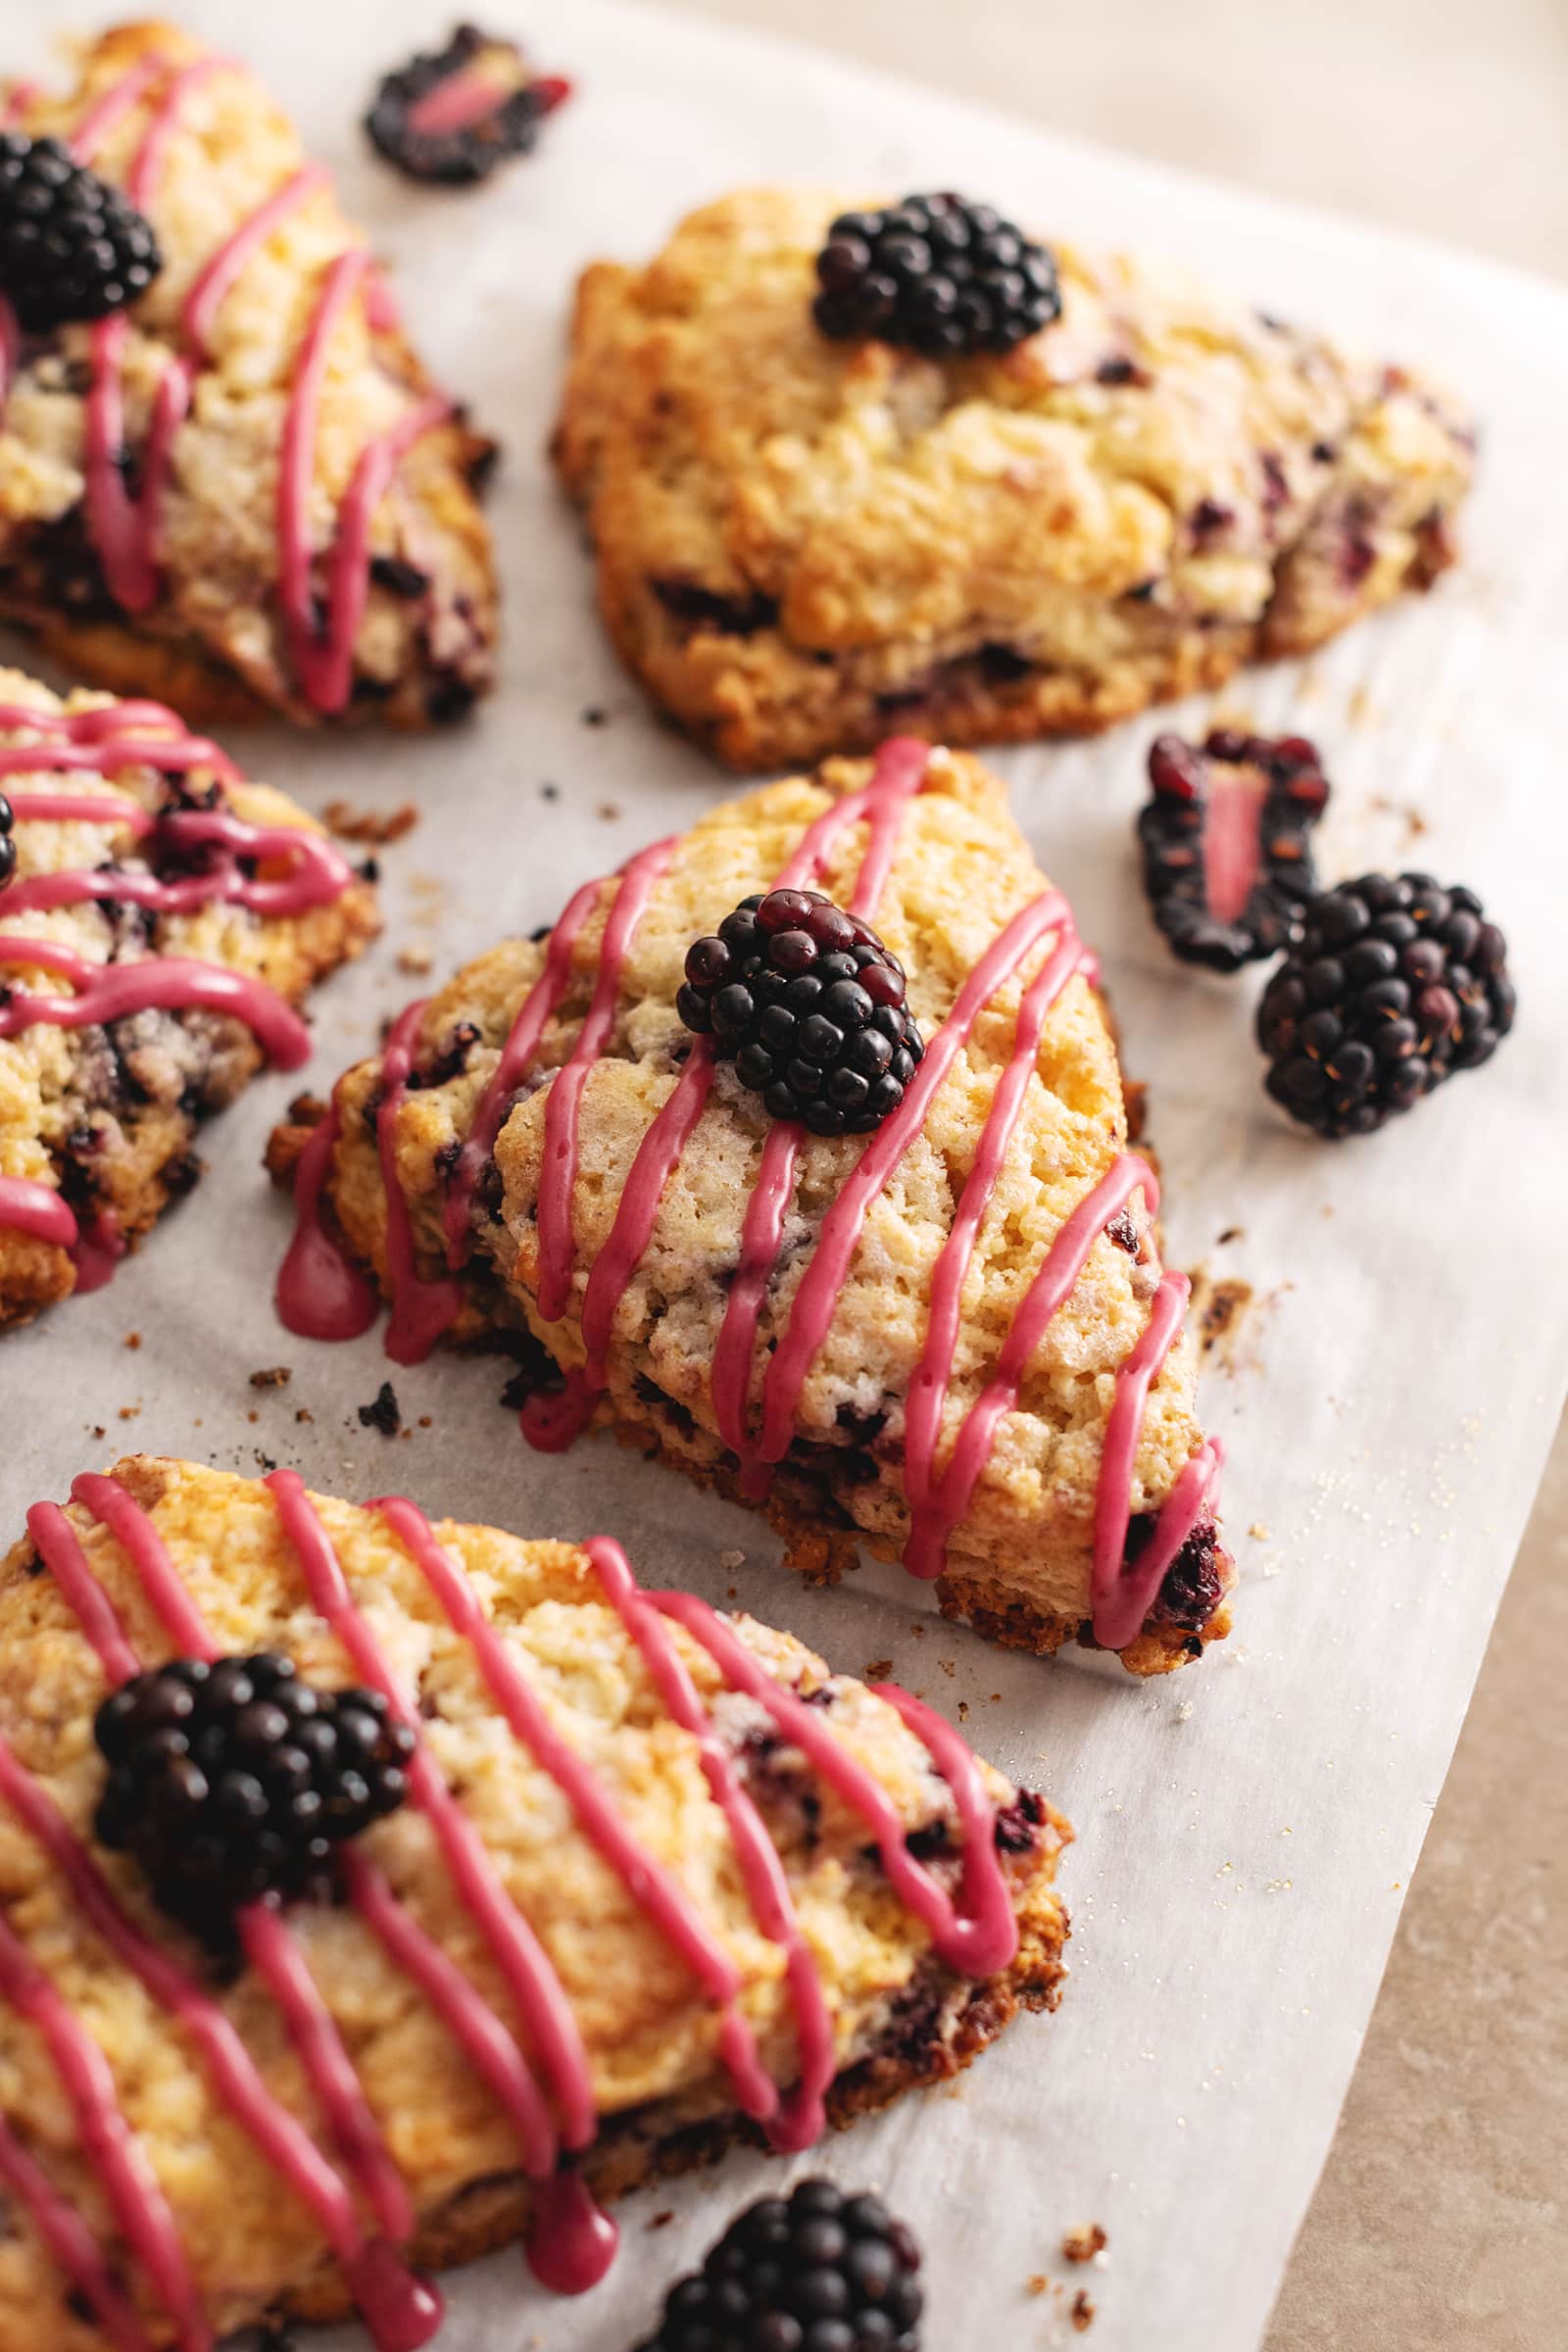 A blackberry scone with a drizzle of pink icing on parchment paper.